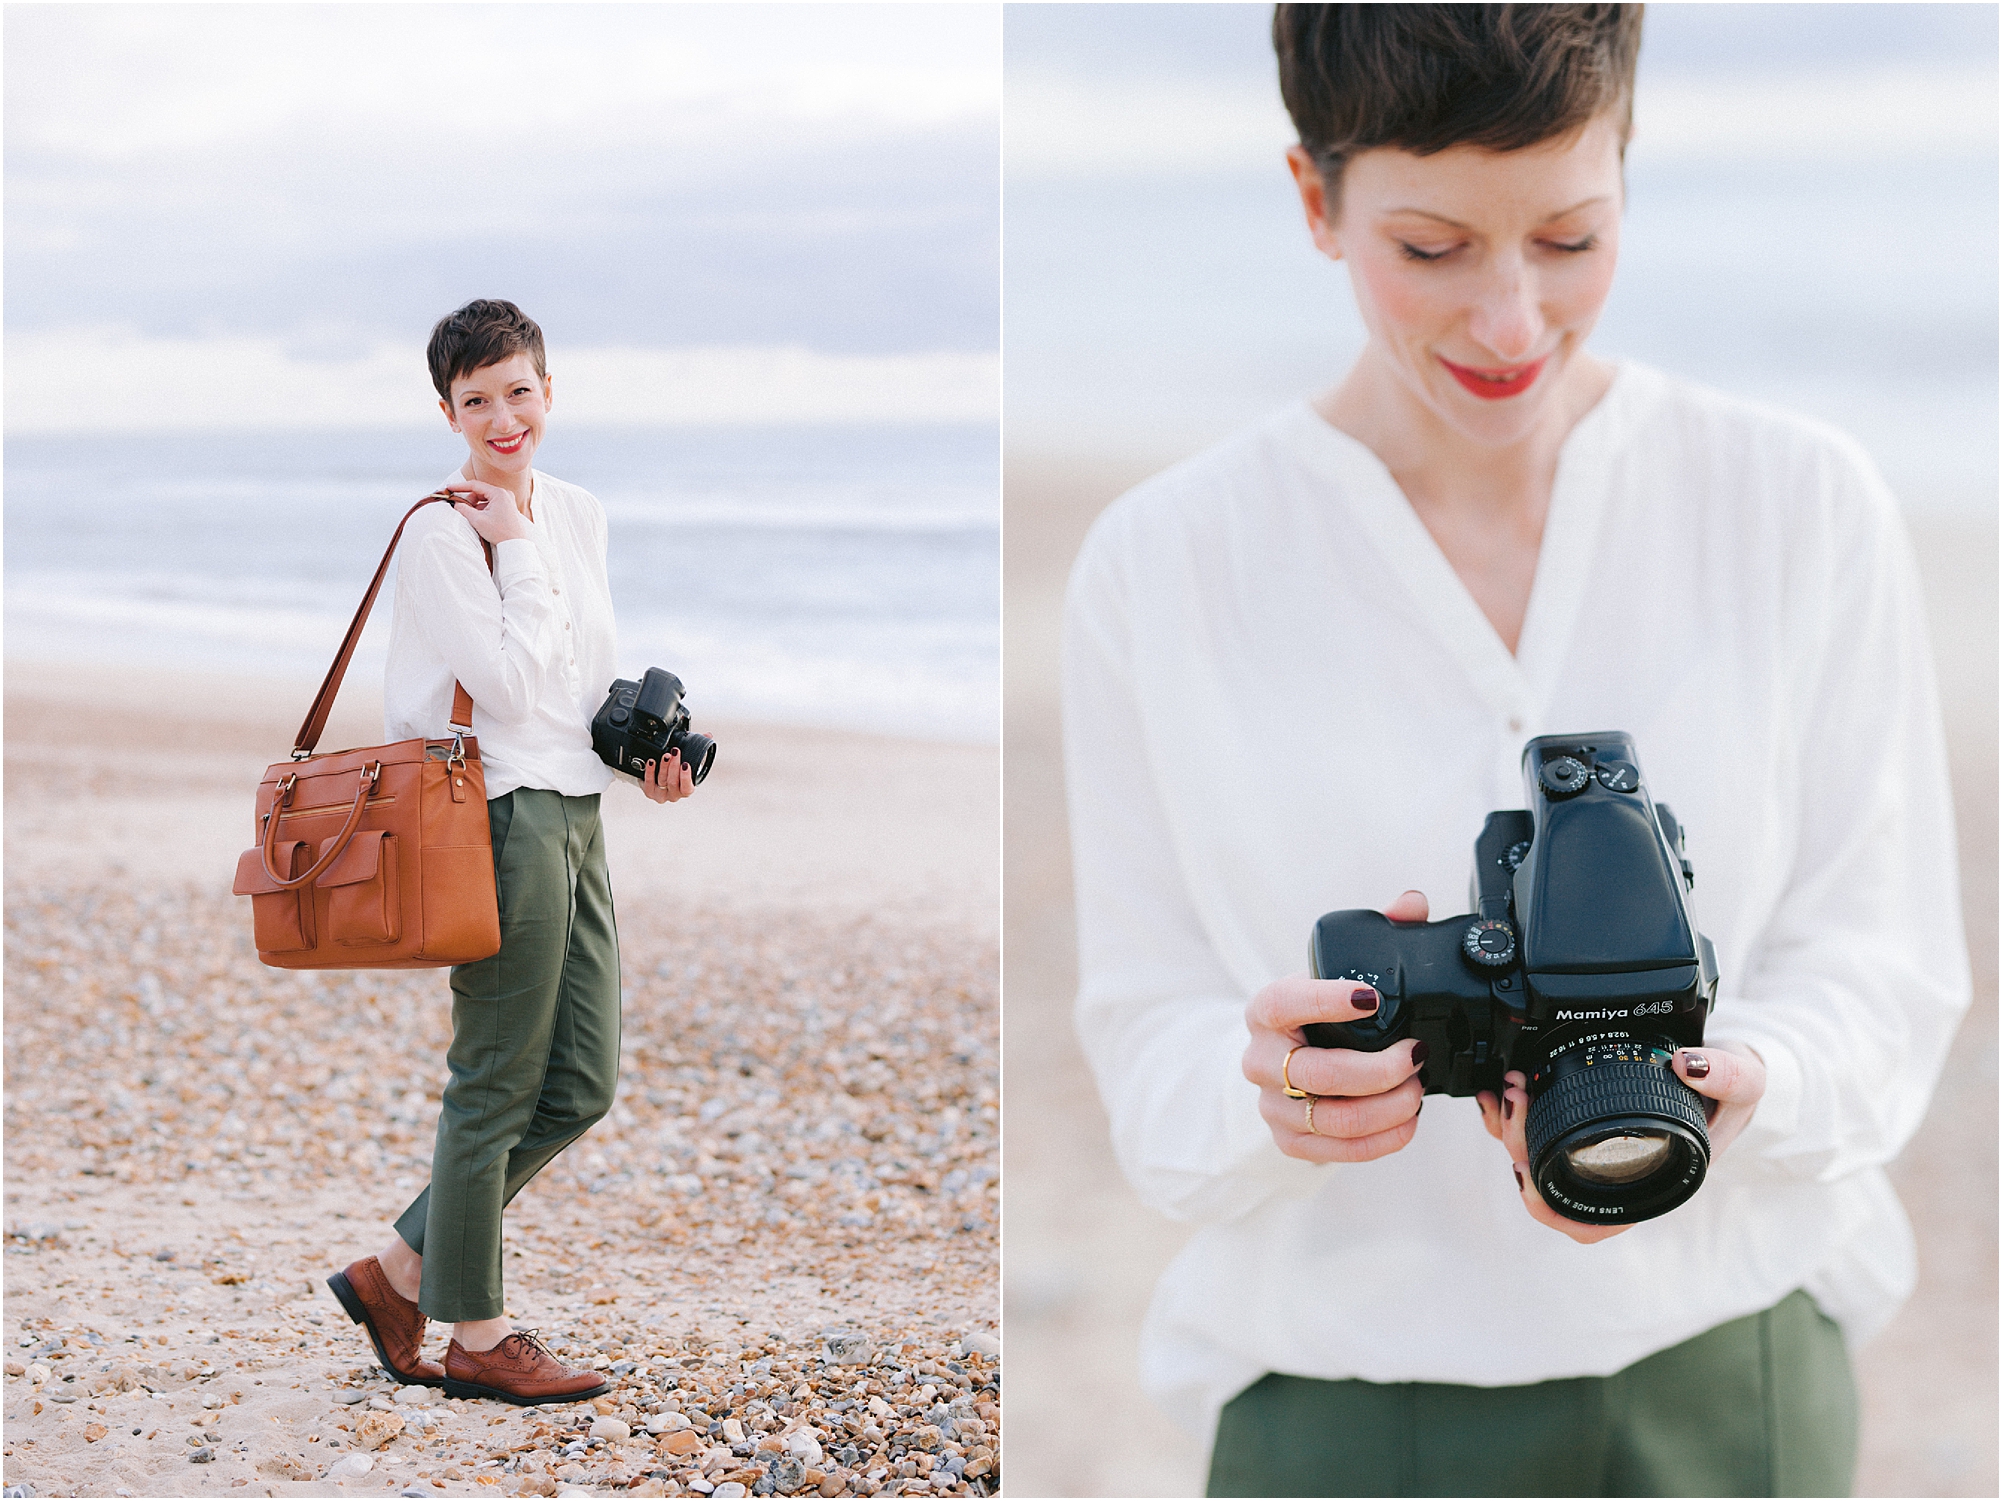 Camilla Arnhold is a Dorset Wedding Photographer specialising in fine art film photography